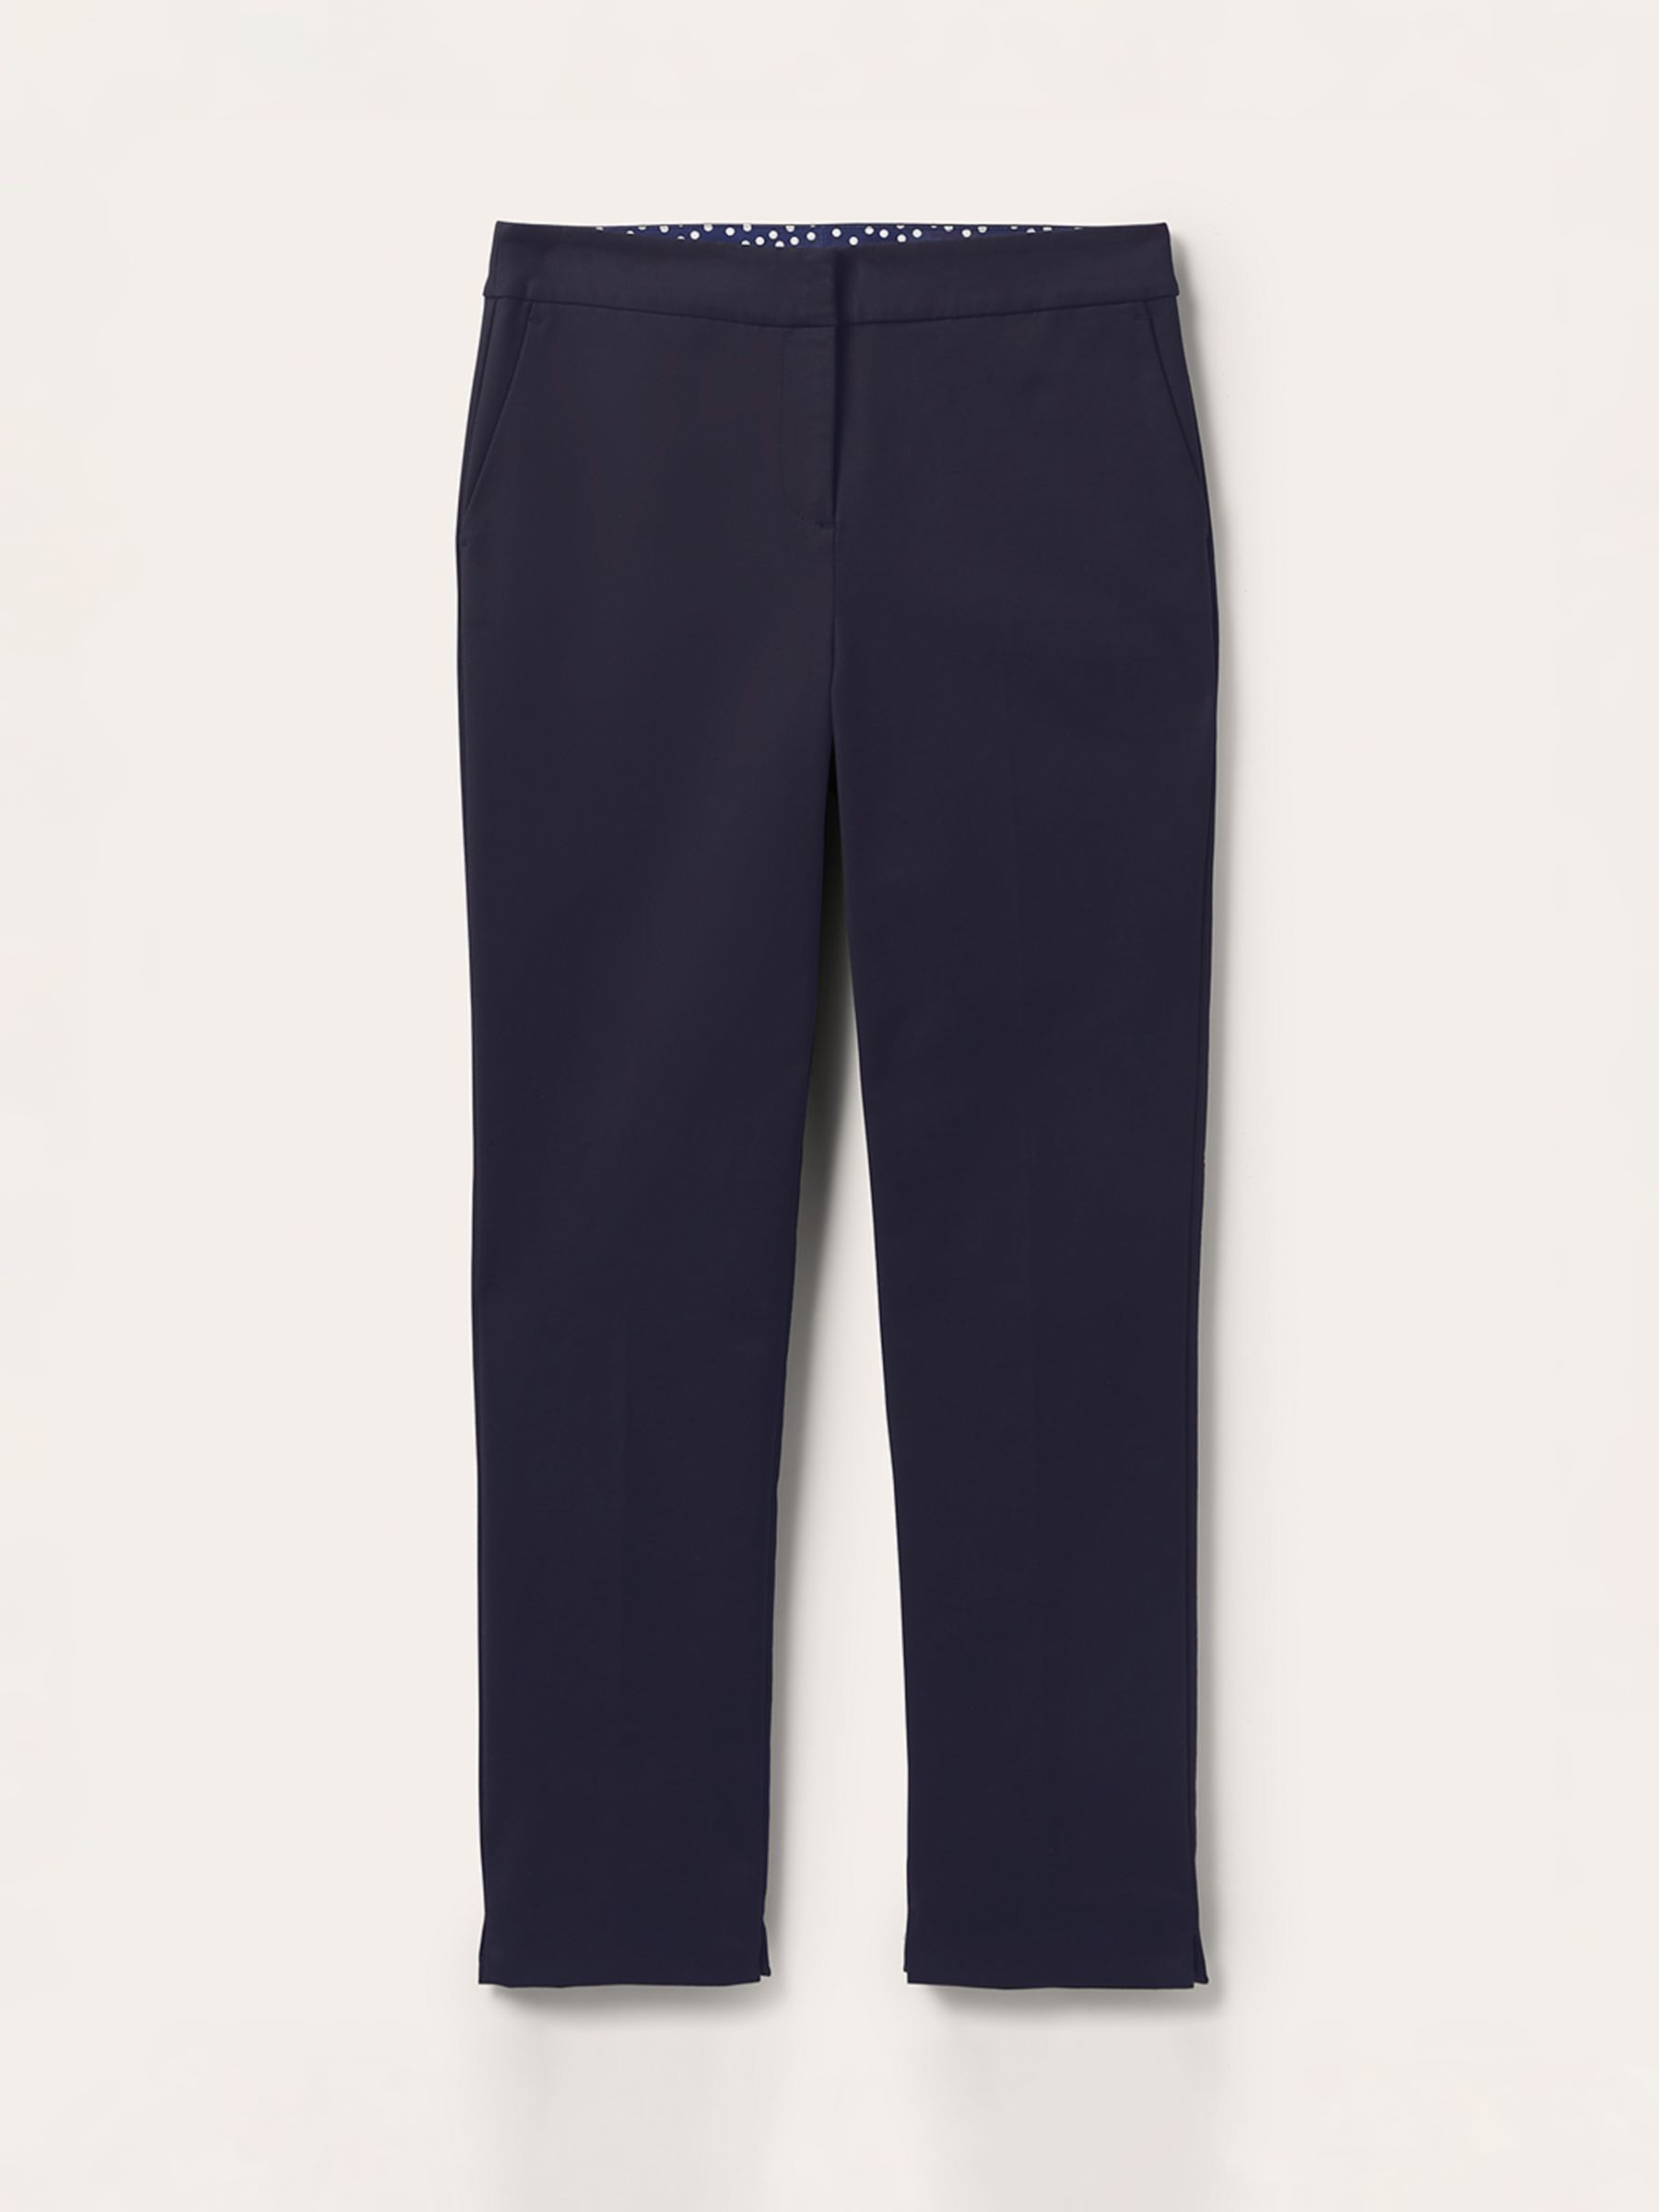 Boden Richmond Trousers, Navy at John Lewis & Partners